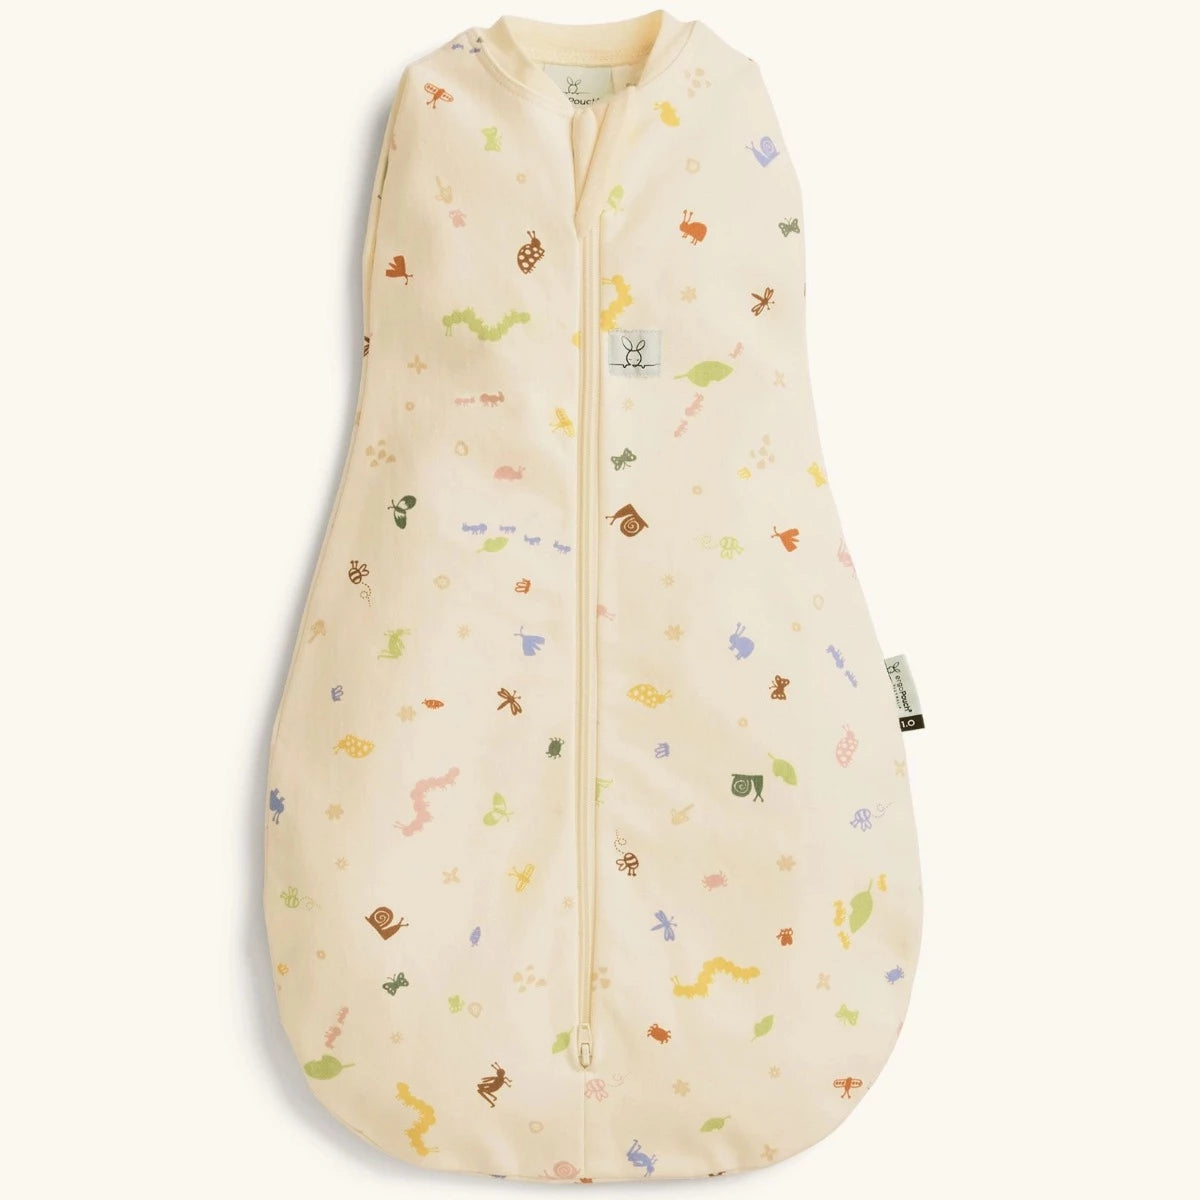 Cocoon Swaddle Bag 0.2 tog (Critters)